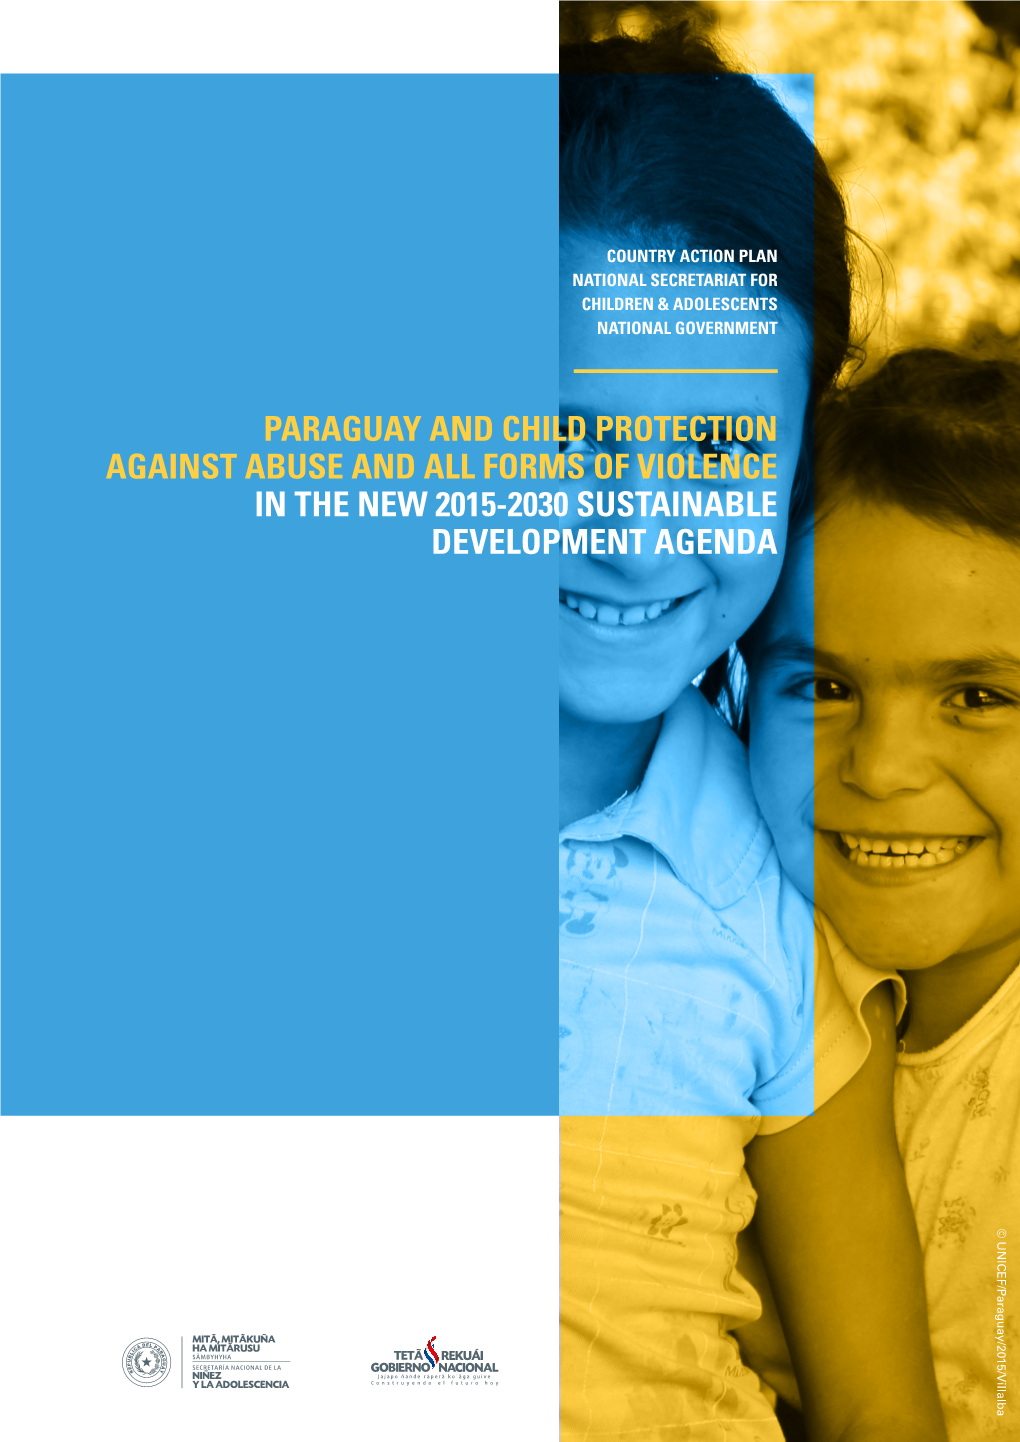 Paraguay and Child Protection Against Abuse and All Forms of Violence 2 in the New 2015-2030 Sustainable Development Agenda